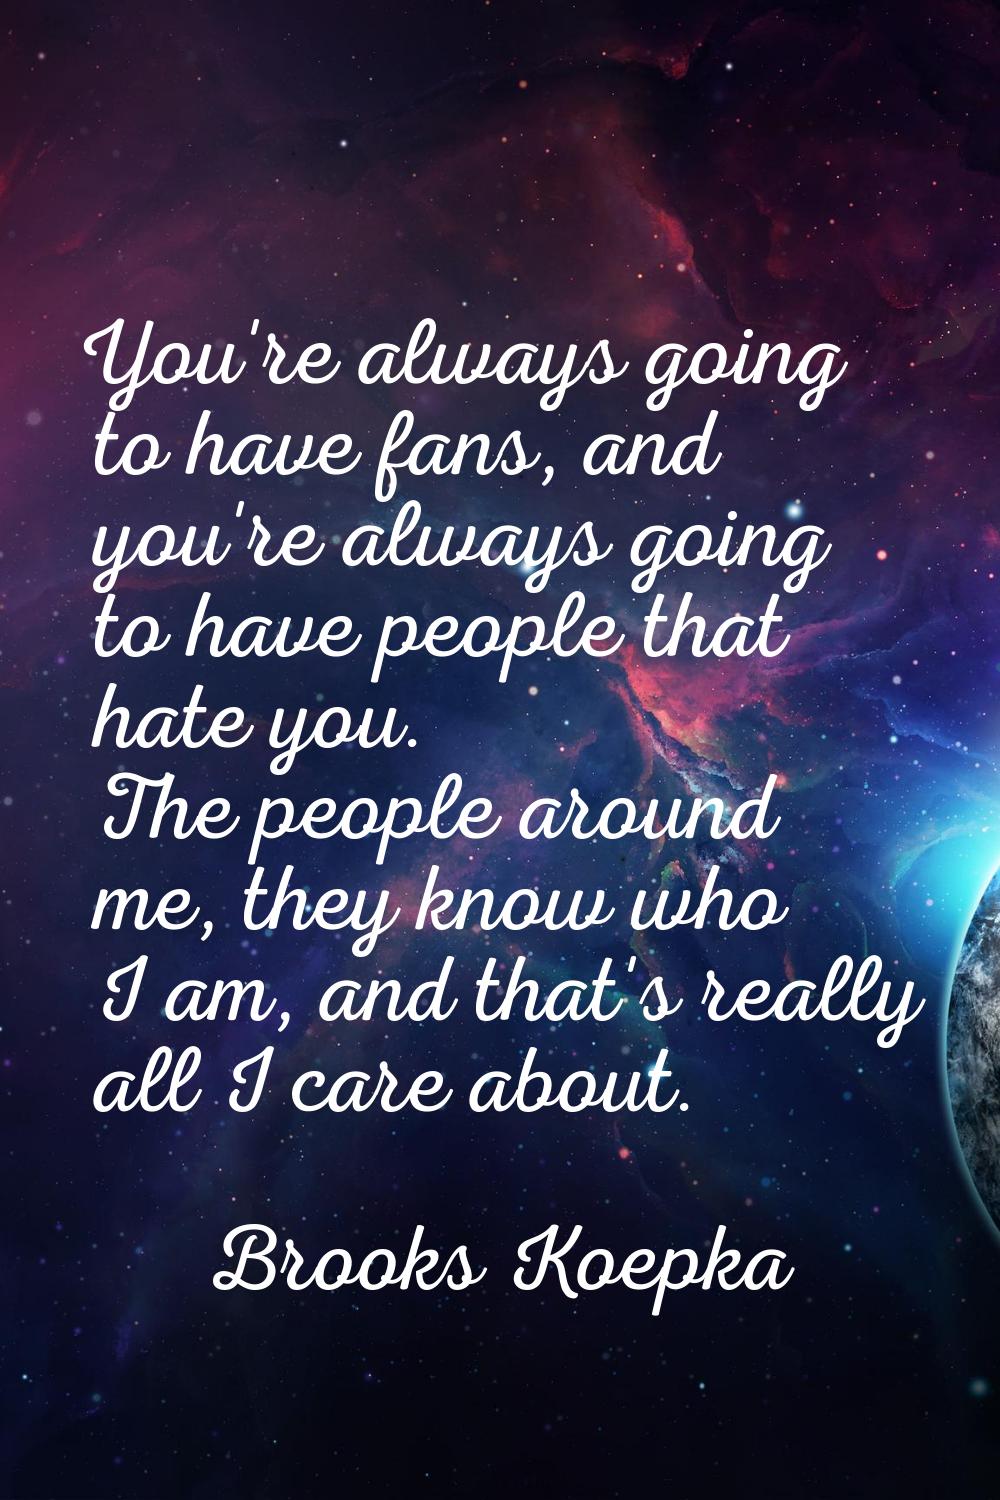 You're always going to have fans, and you're always going to have people that hate you. The people 